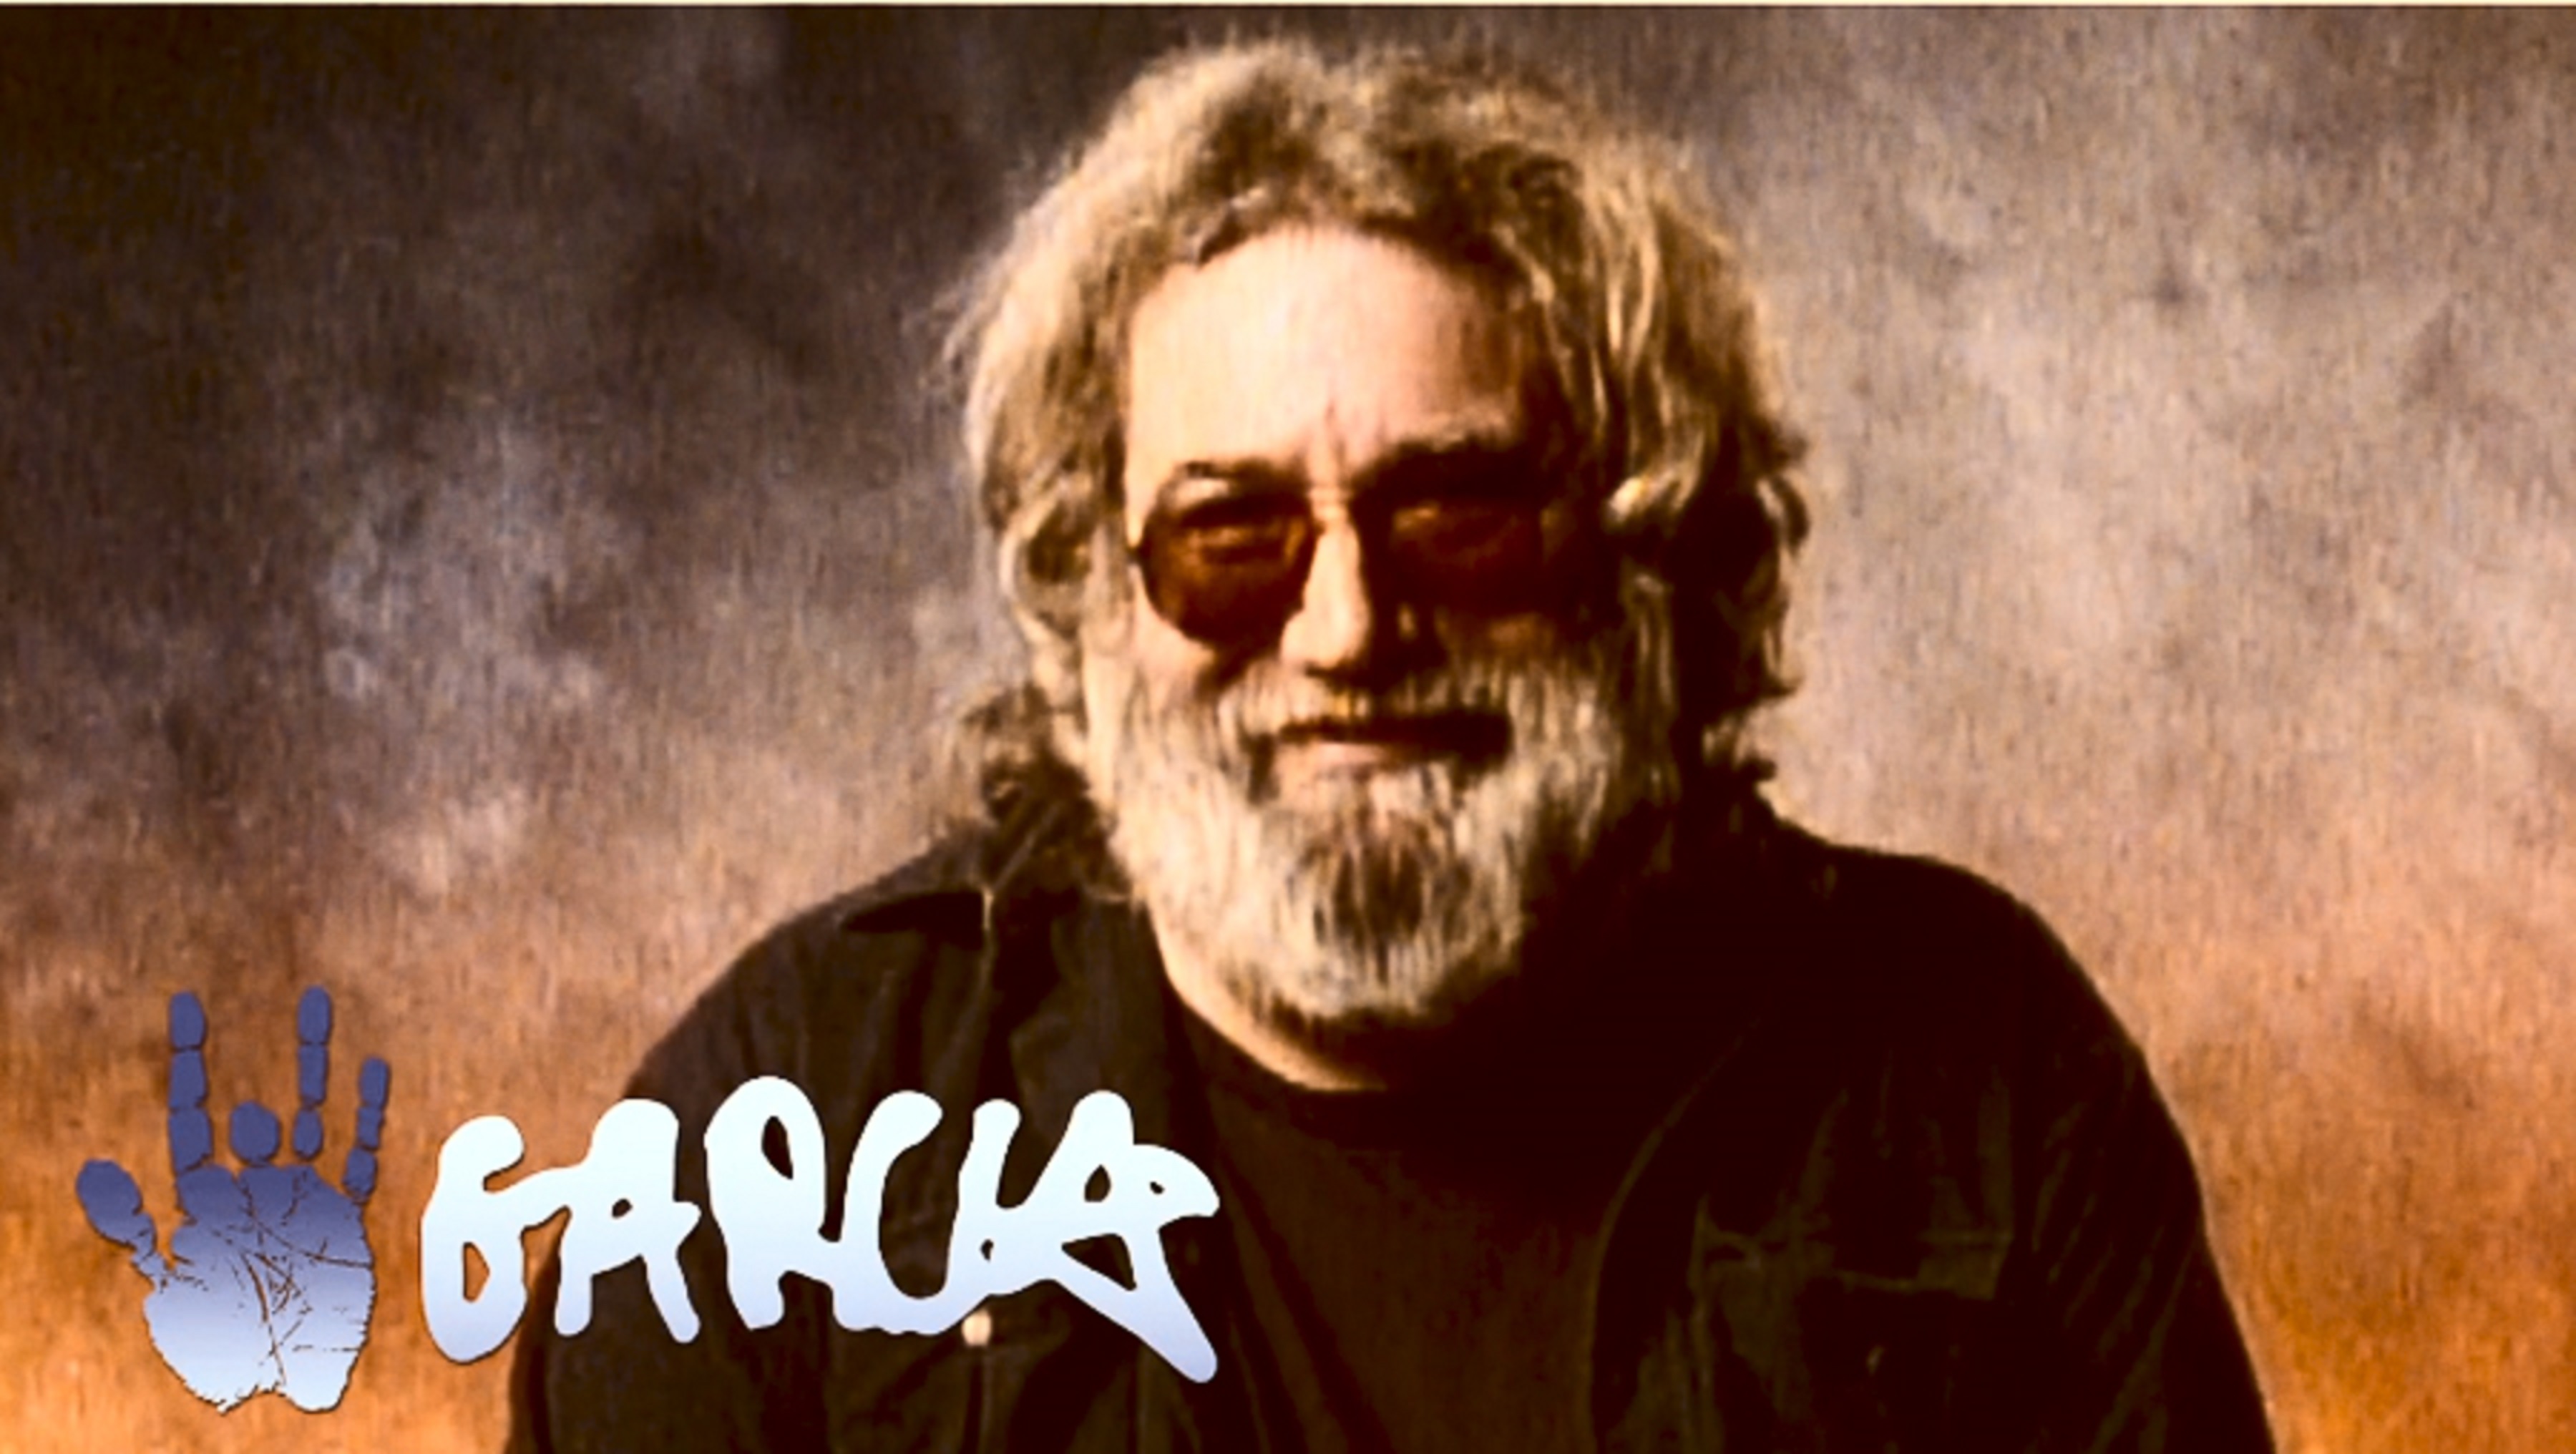 New “Jerry Garcia, Artist” documentary offers rare glimpse of the man behind the legend